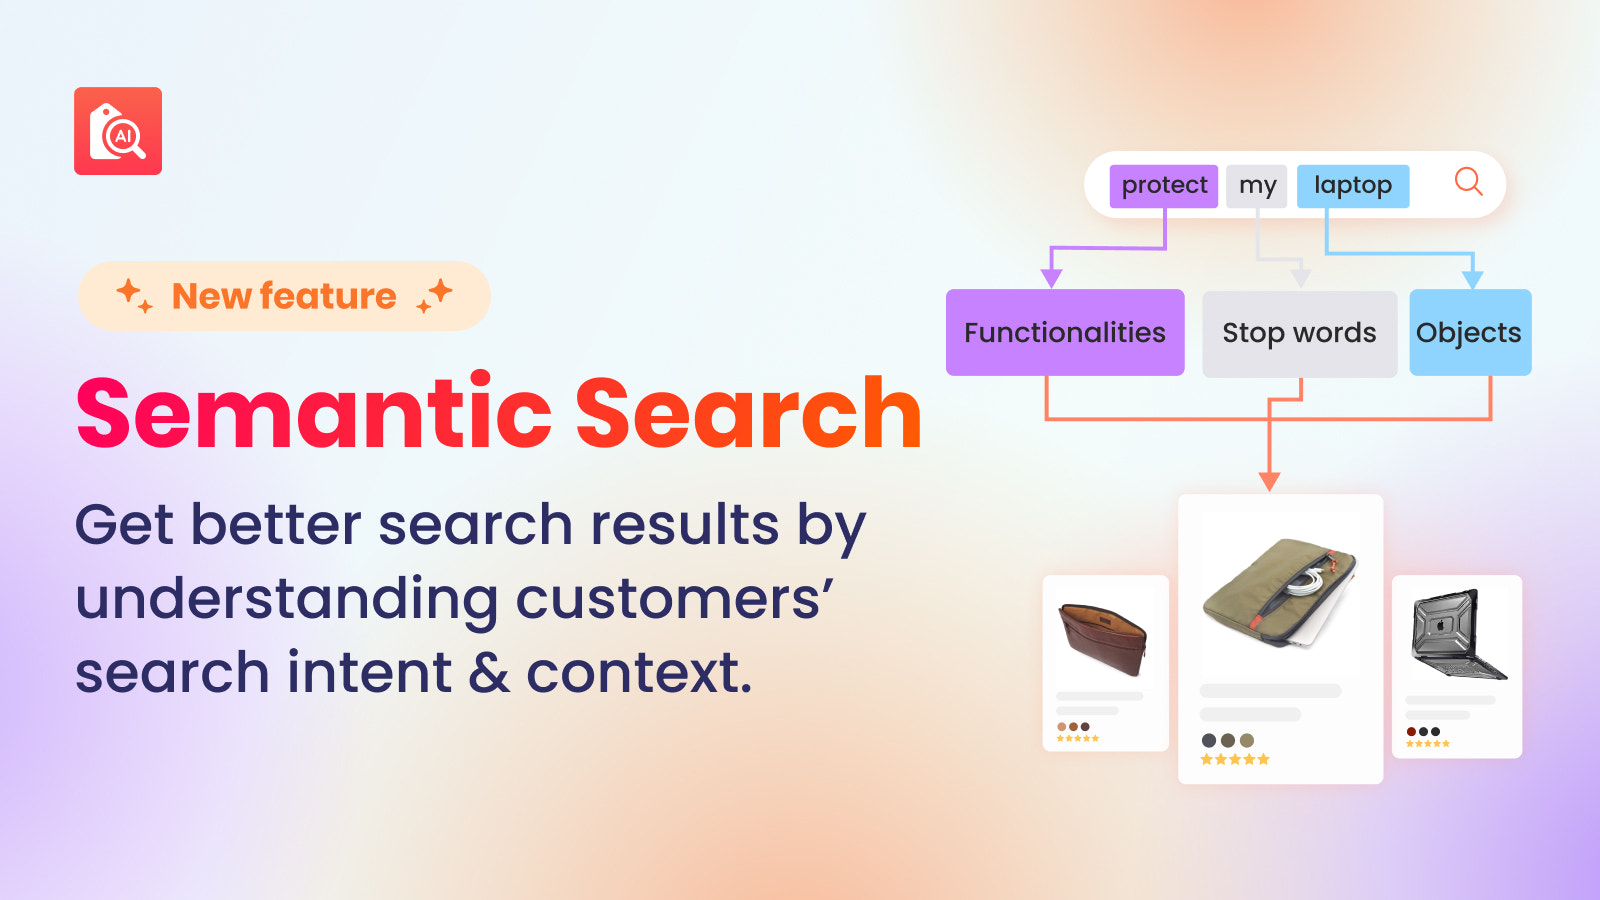 Shopify Semantic Search. Understand customer search intent